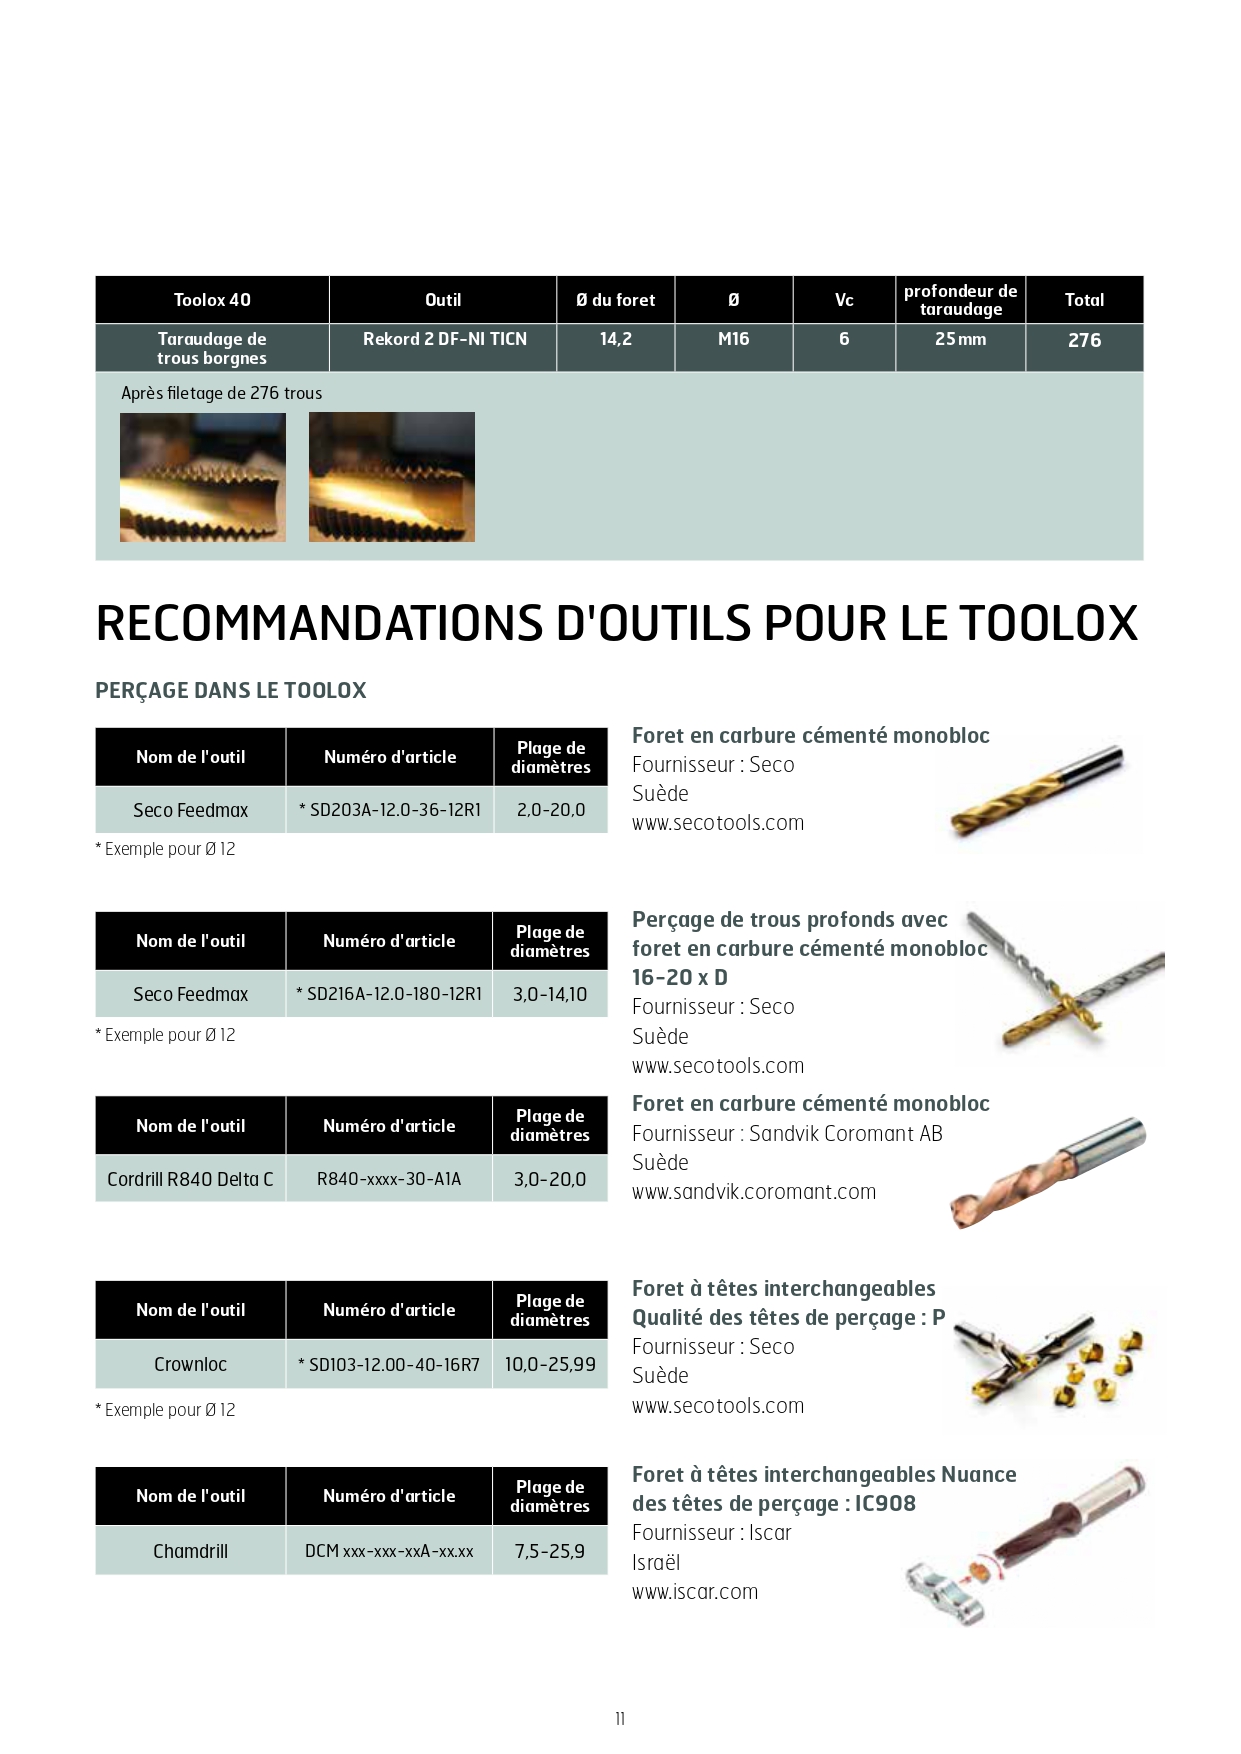 Brochure recommandations d'usinage du Toolox®_page-0011